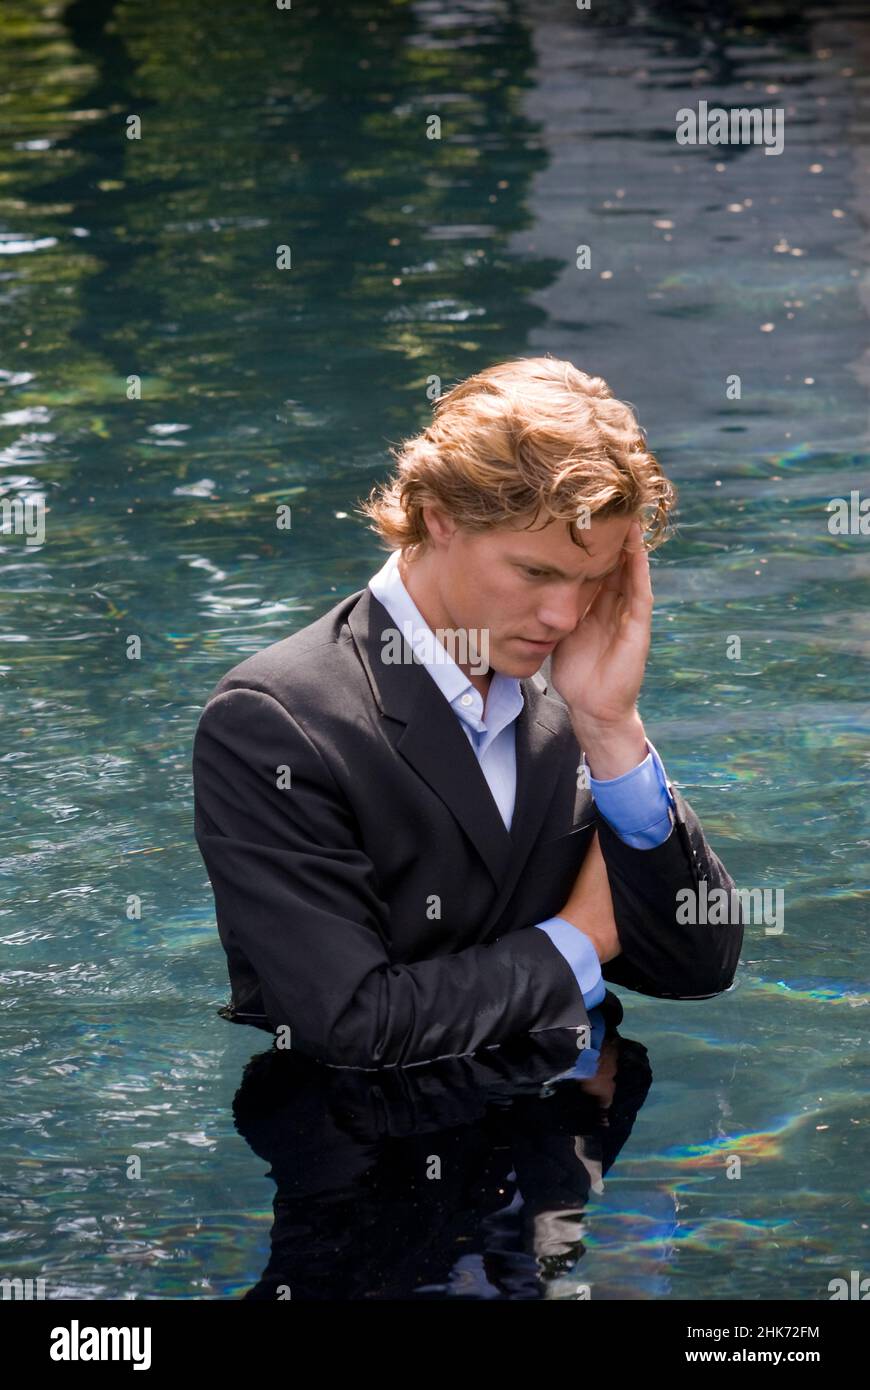 Young man wearing business suit, standing waist deep in water, hand on his face Stock Photo